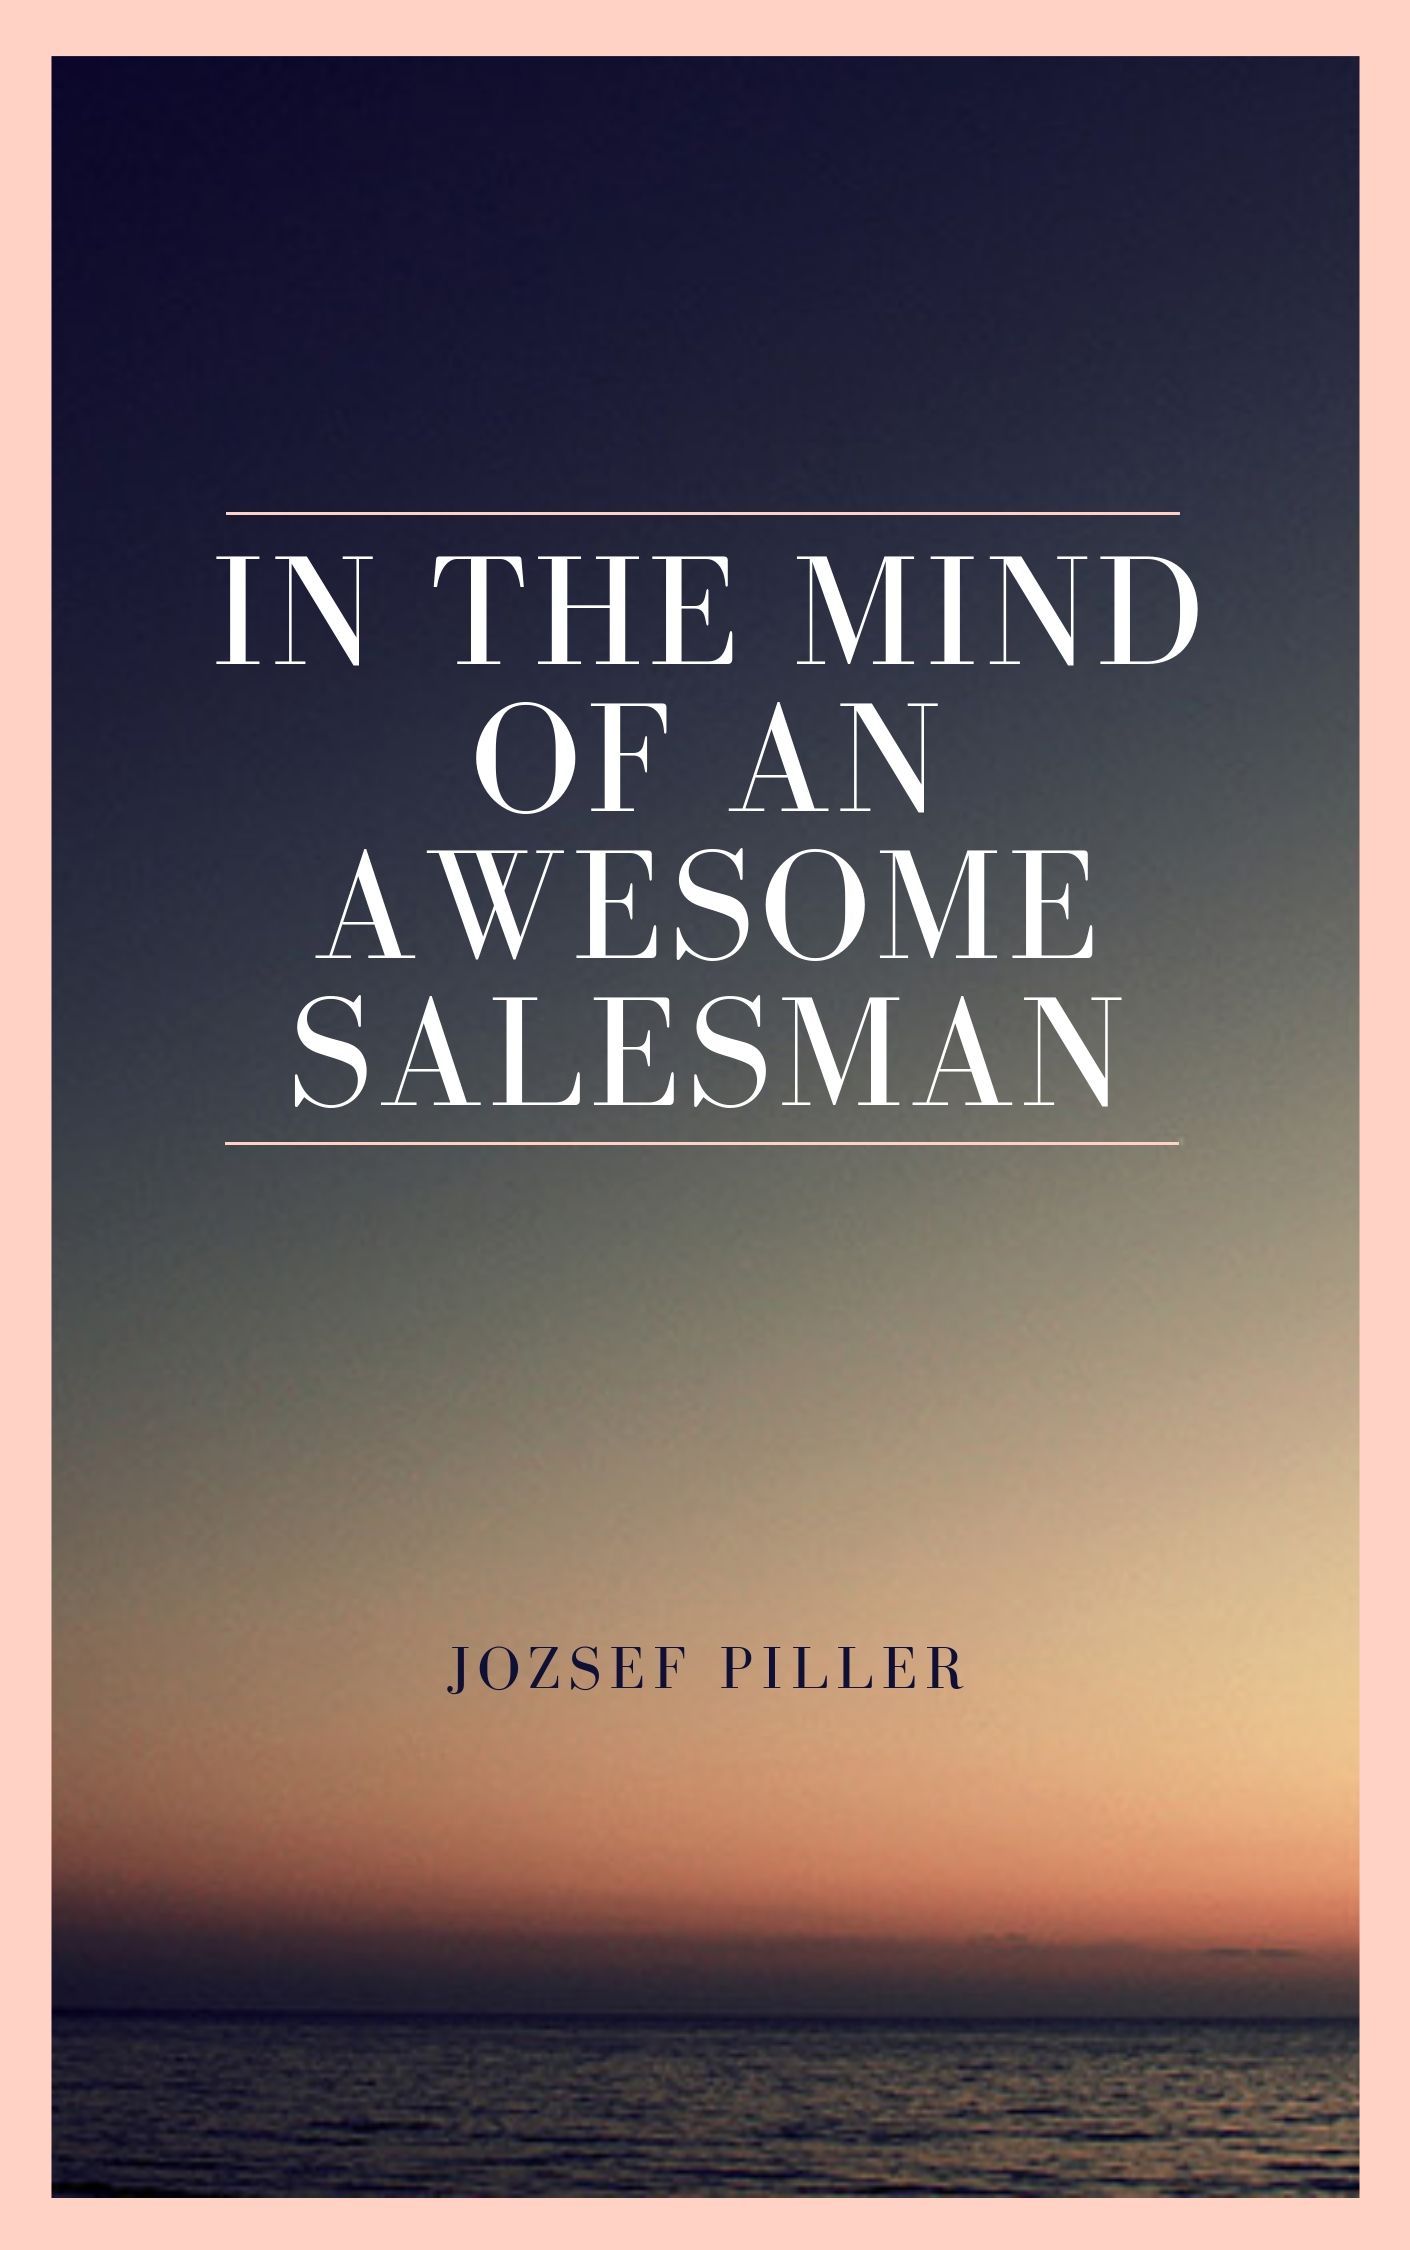 In the mind of an awesome salesman, eBook by Jozsef Piller